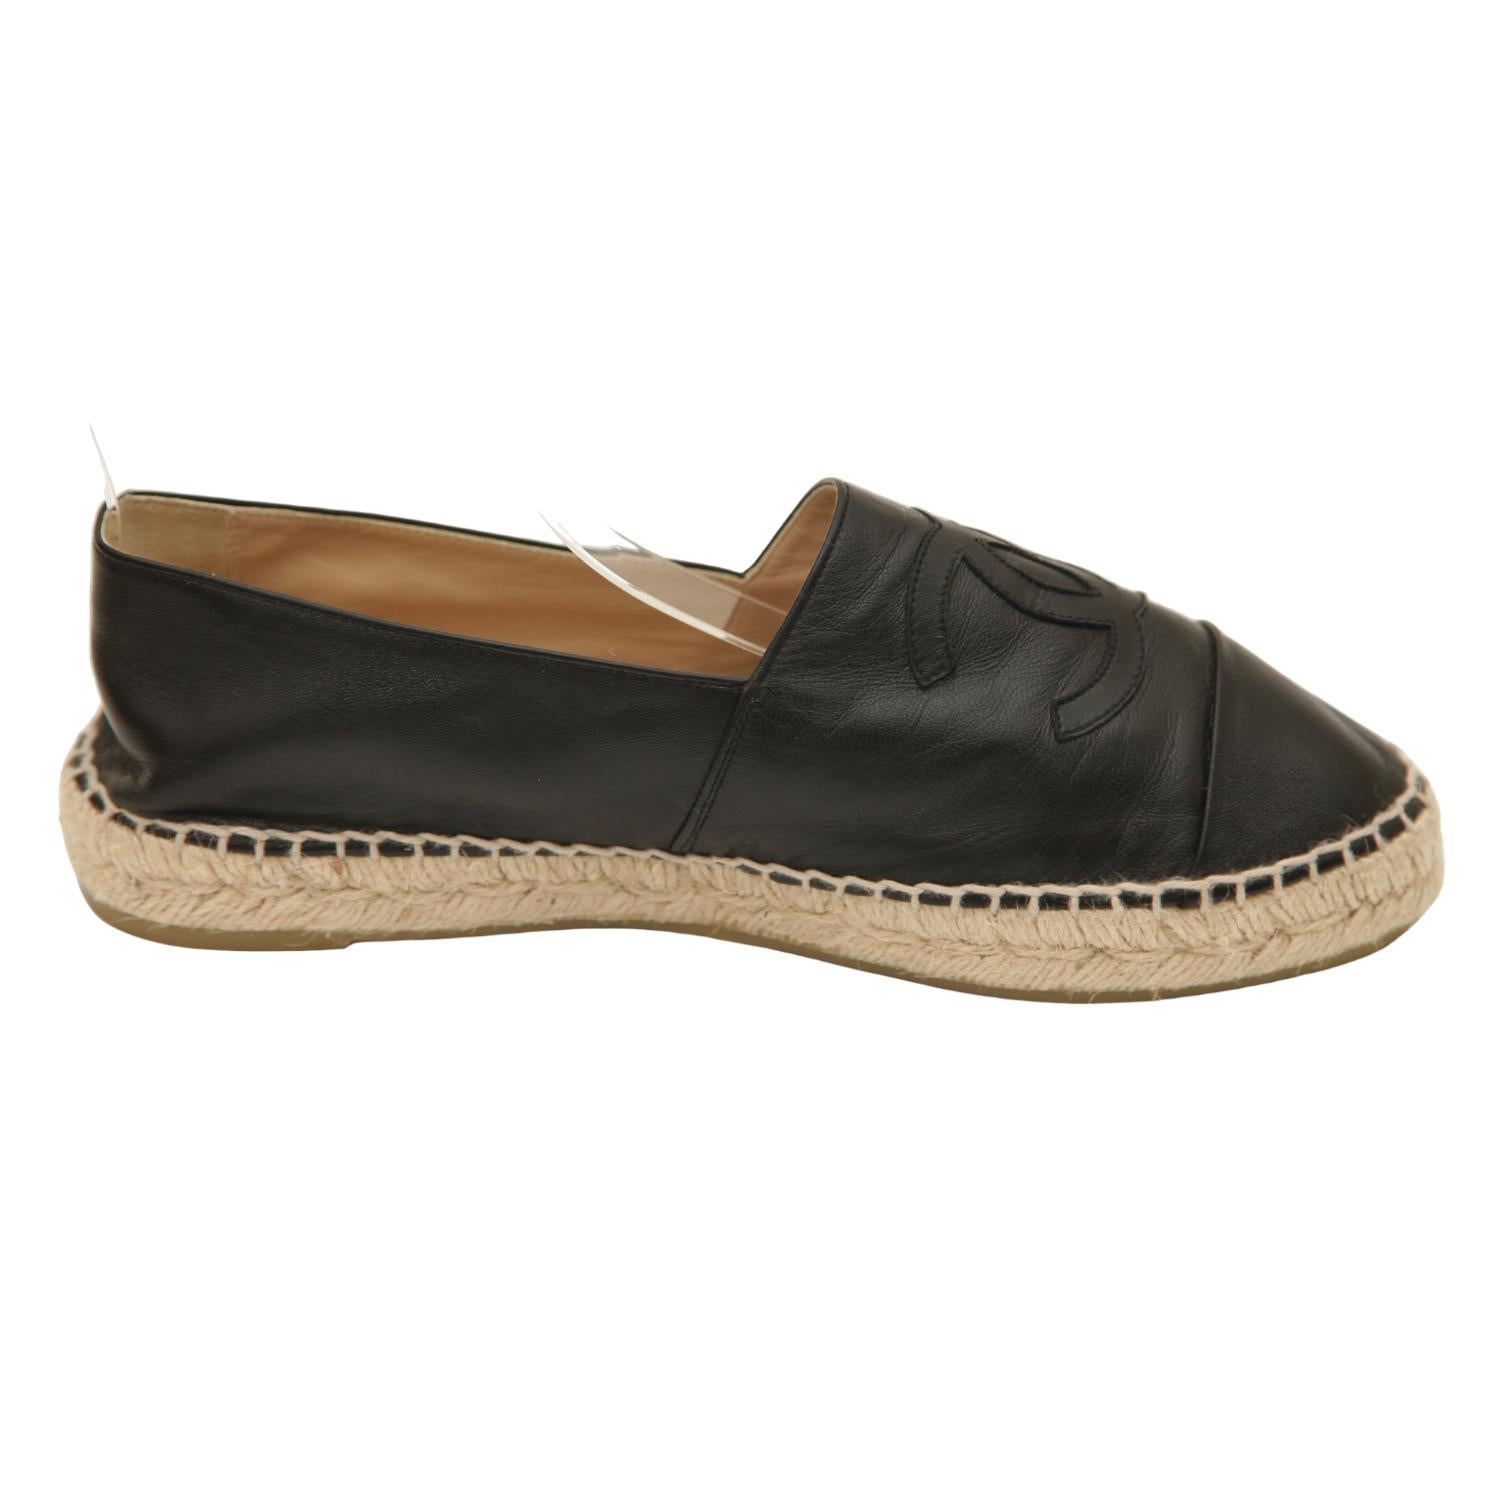 GUARANTEED AUTHENTIC CHANEL BLACK LAMBSKIN LEATHER ESPADRILLES

Details:
- Black lambskin leather uppers.
- CC logo stitched cap toe.
- Slip on.
- Leather insole and rubber sole.
- Comes with dust bag.

Size: 40

Measurements (Approximate):
-